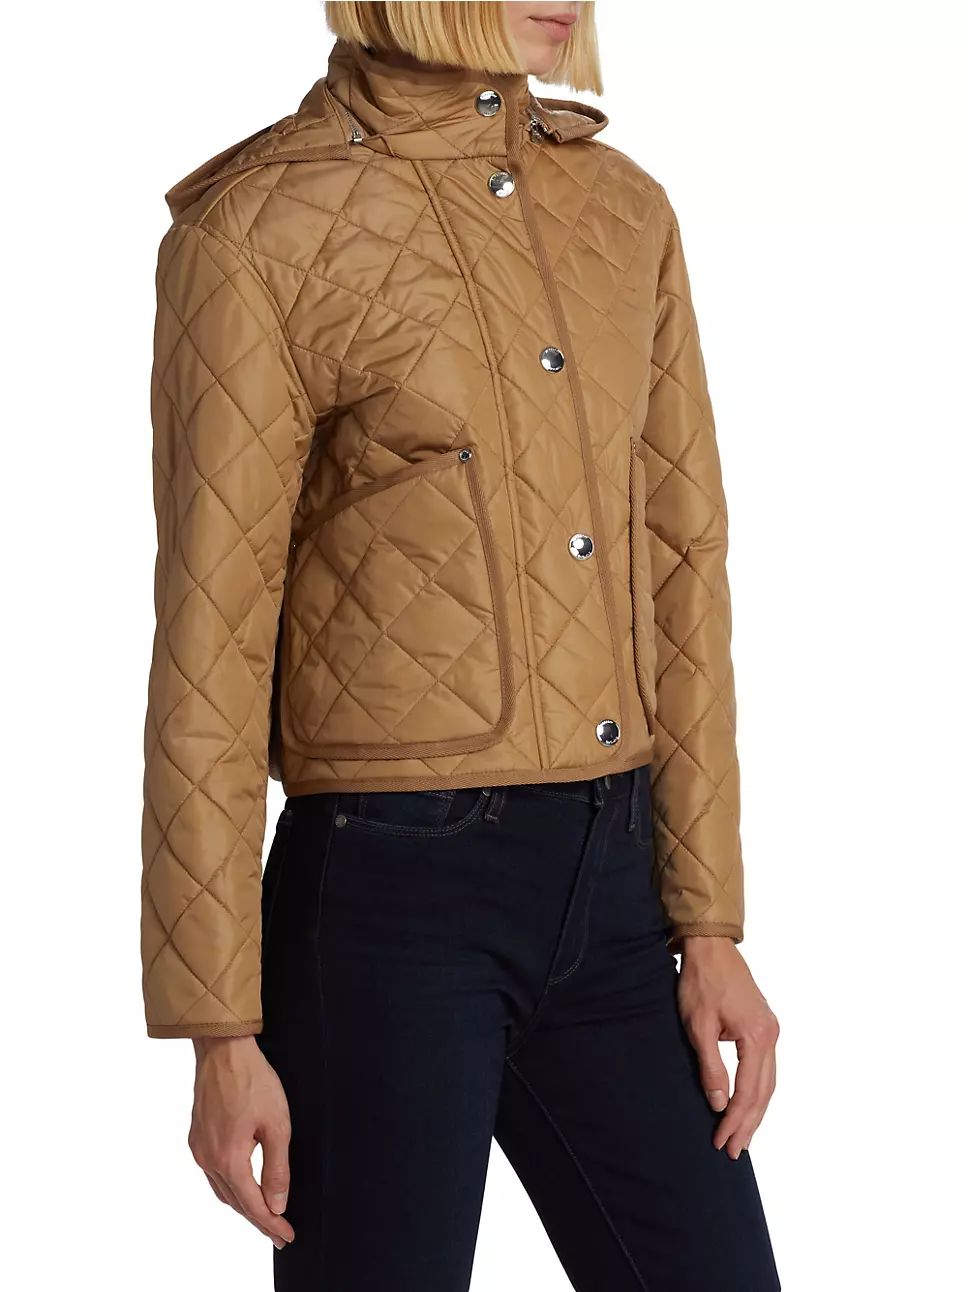 Burberry Diamond-Quilted Nylon Cropped Jacket | Saks Fifth Avenue